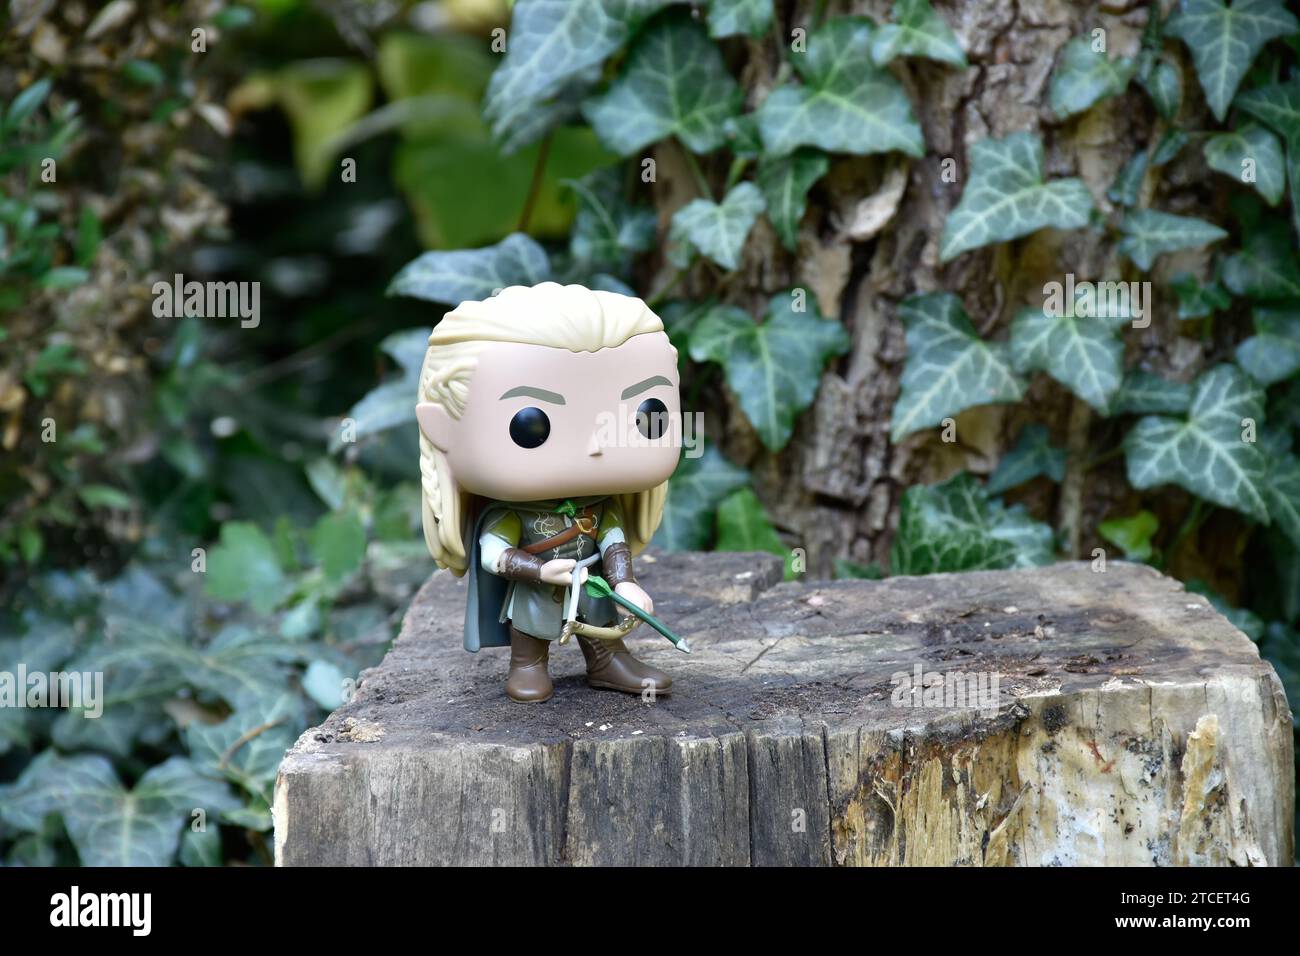 Funko Pop action figure of elf Legolas from fantasy movie The Lord of the Rings. Warrior holding bow and arrow. Forest tree, green ivy leaves. Stock Photo